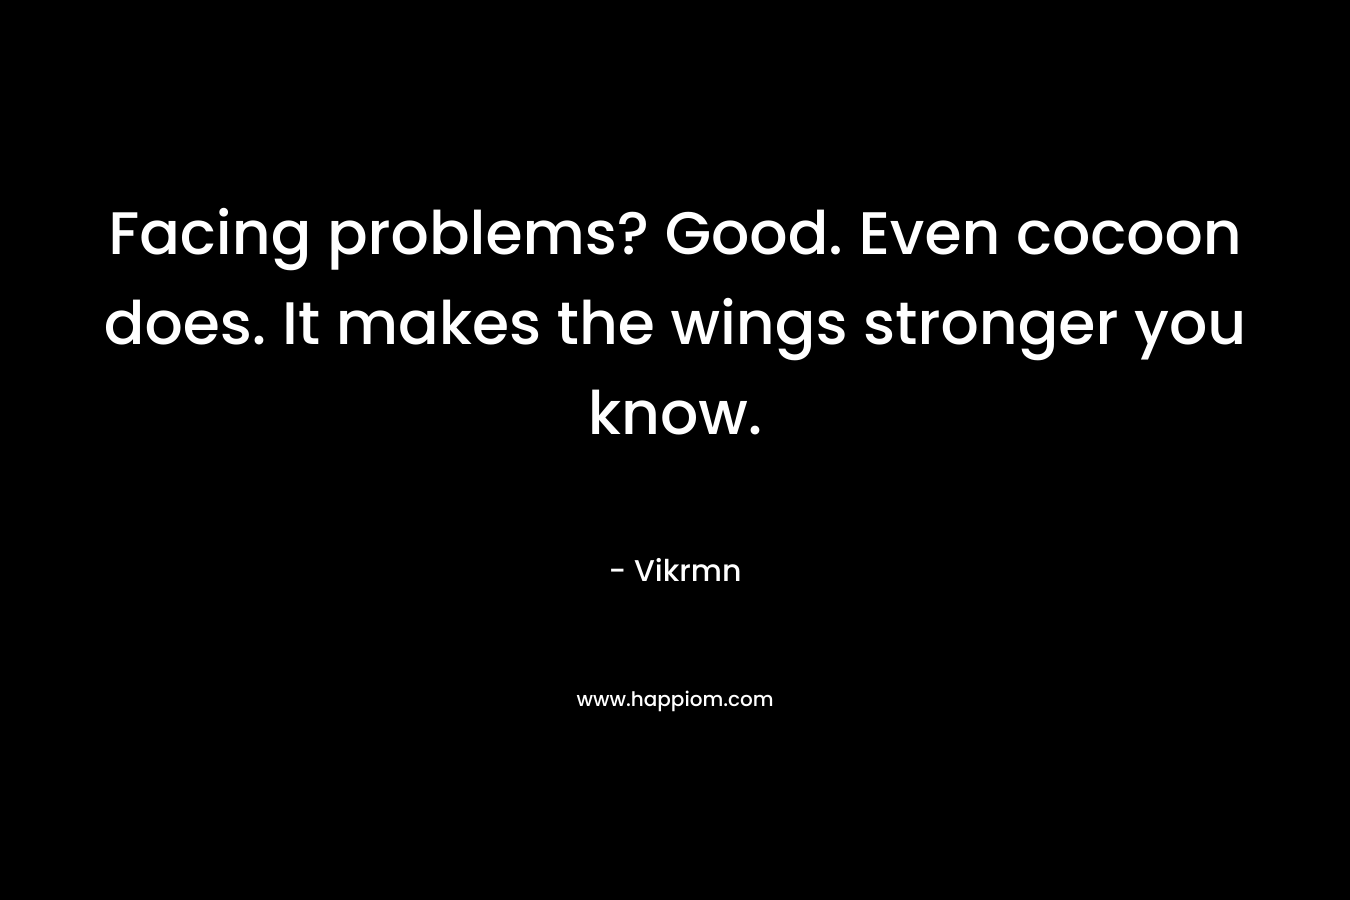 Facing problems? Good. Even cocoon does. It makes the wings stronger you know.